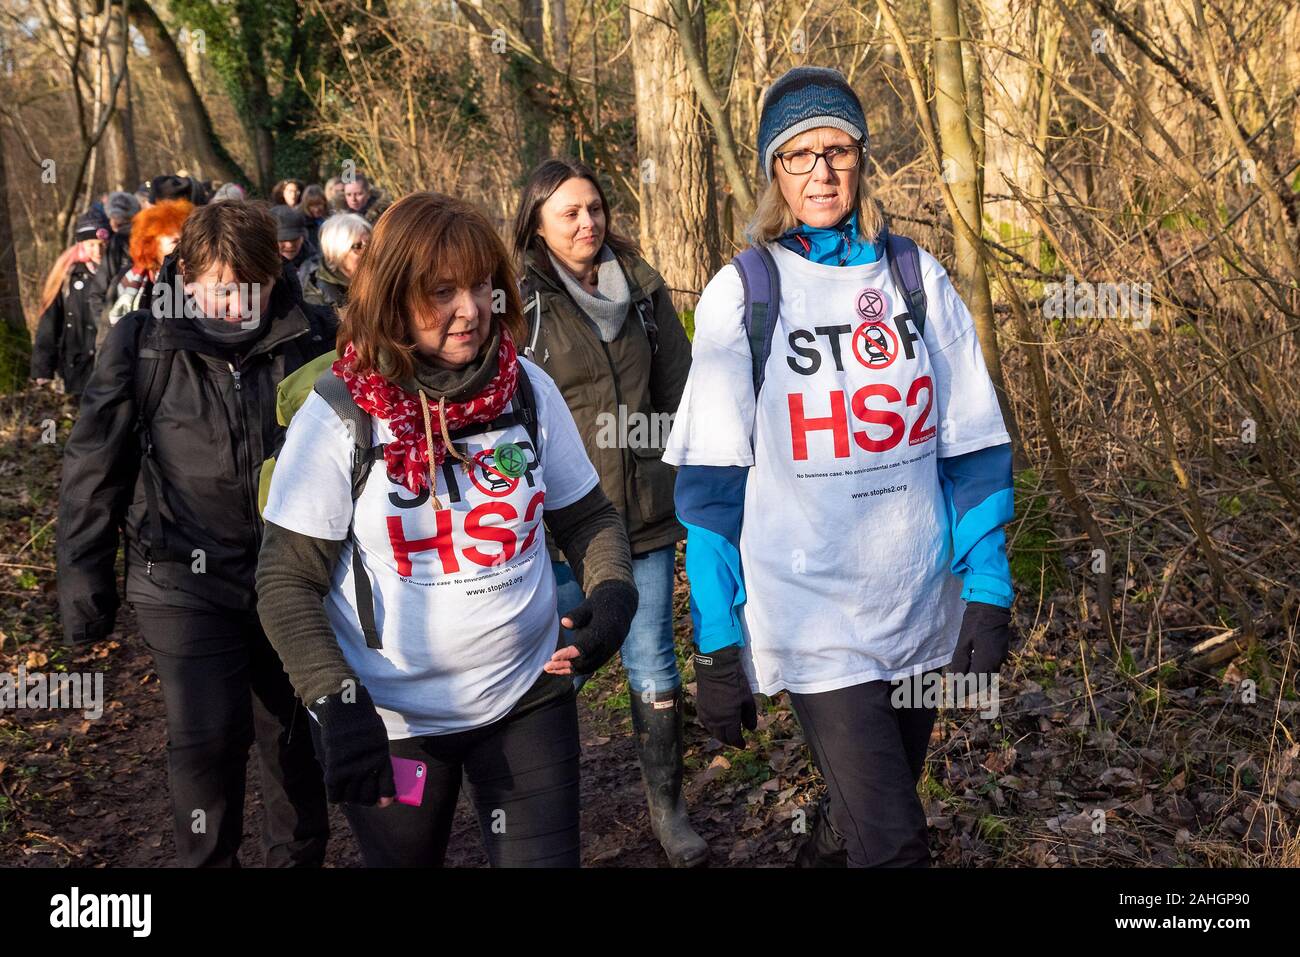 Denham, UK. 29th December 2019. Stand for the Trees, a Walk for Wildlife and Water, organised by Chris Packham and supported by Extinction Rebellion, #ReThinkHS2, Save the Colne Valley, STOP HS2 and Hillingdon Green Party. Speakers described the threats to the habitats that are the homes of endangered eels, bats, otters, water voles, the loss of 28,000 trees to HS2 and the chalk aquifer that contributes to much of London’s water. Pictured, 2 women campaigners wearing Stop HS2 tee shirts walking through woodland. Credit: Stephen Bell/Alamy Stock Photo